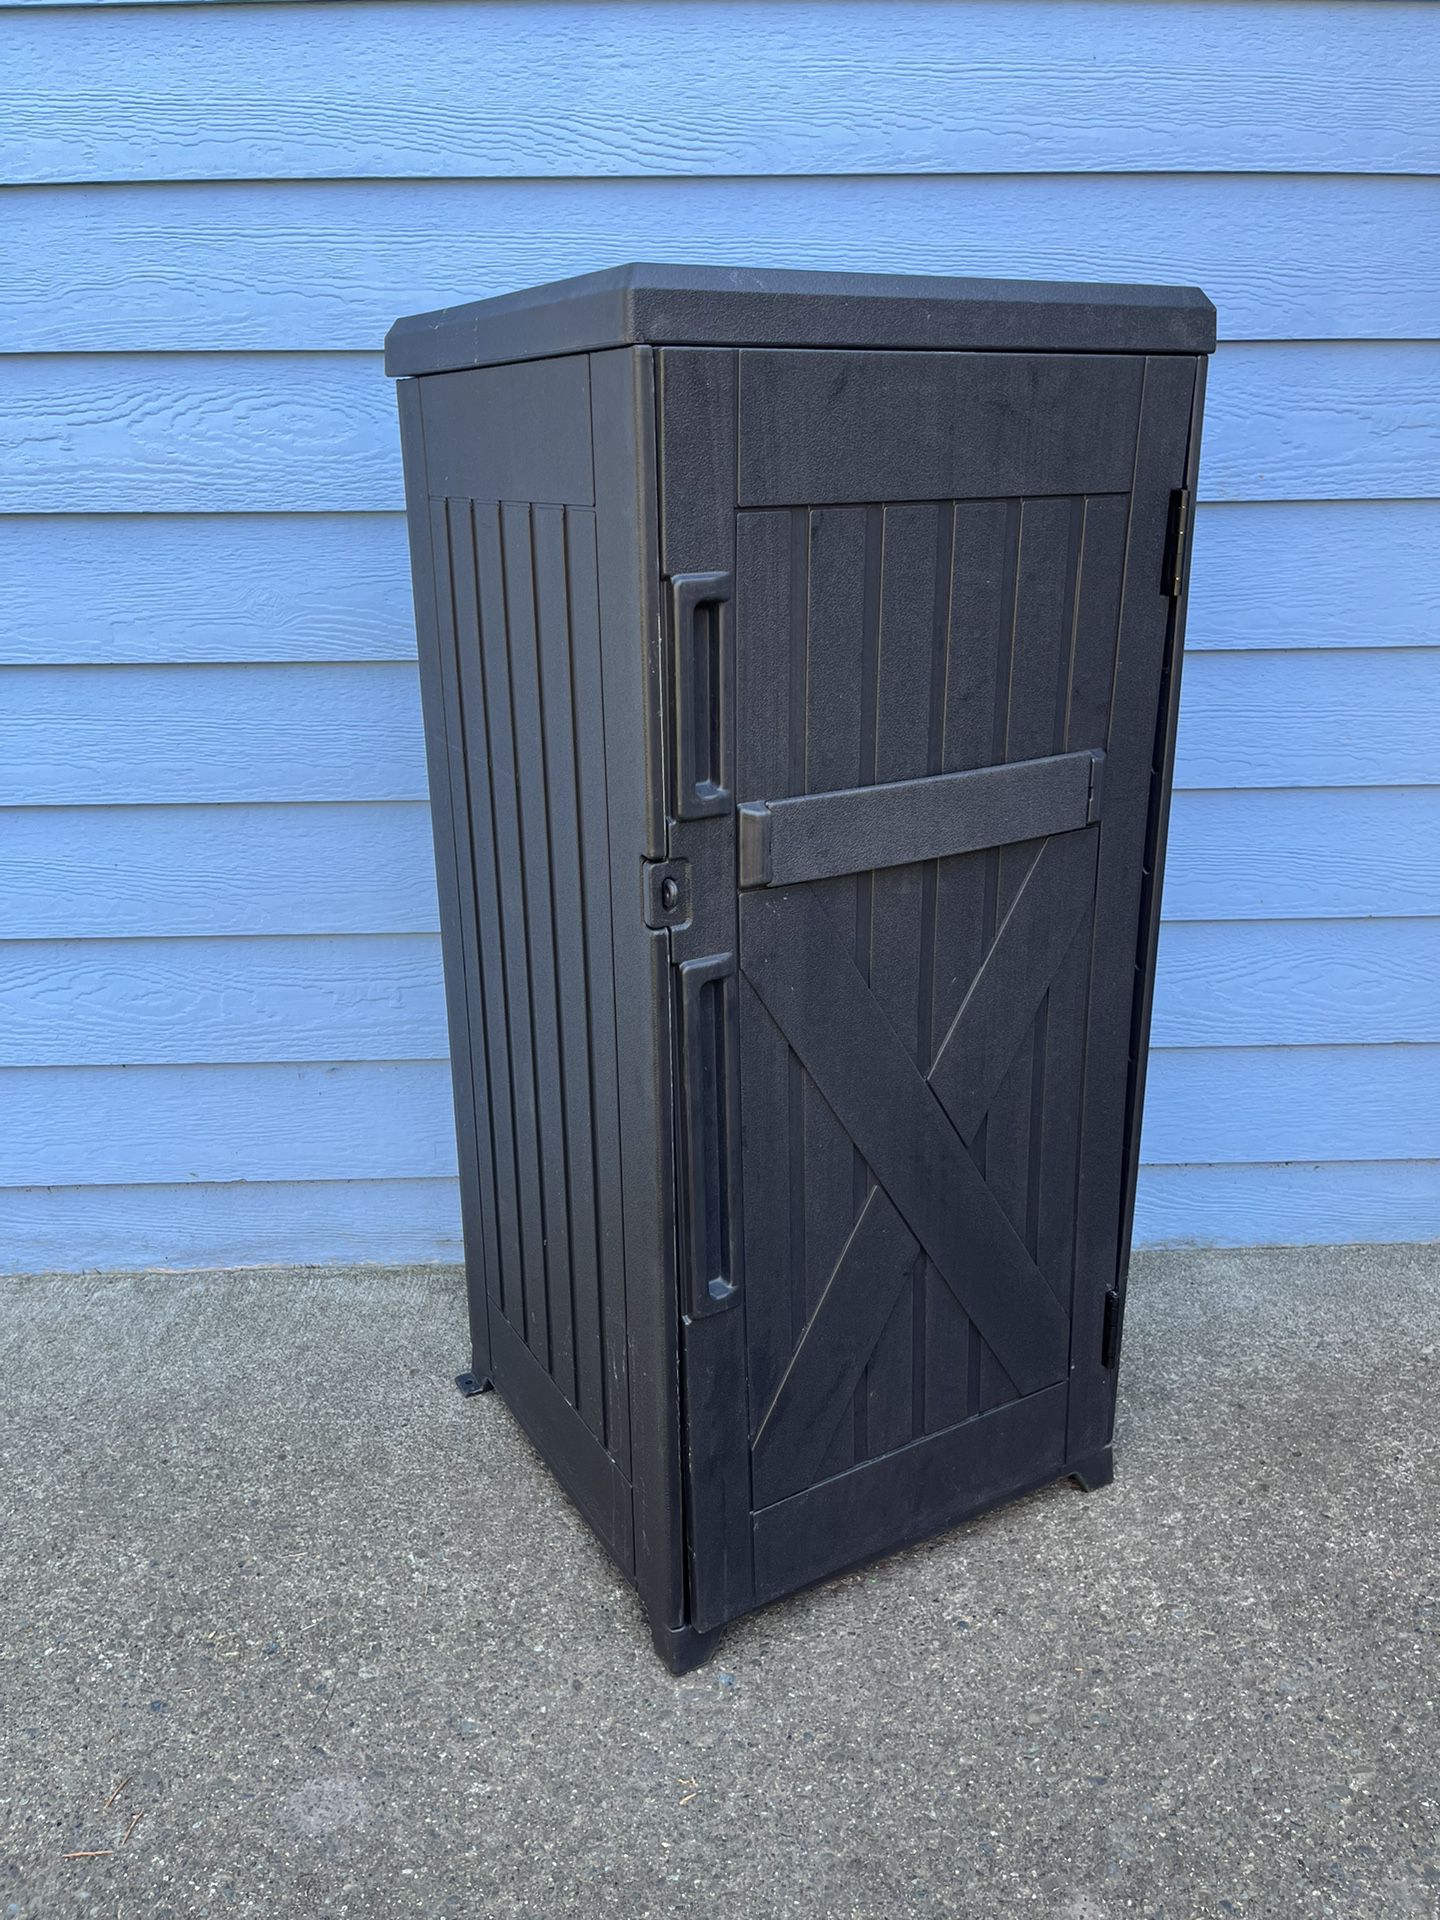 60 Gallon Large Package Delivery and Storage Box with Lockable Secure, Double-Wall Resin Outdoor.